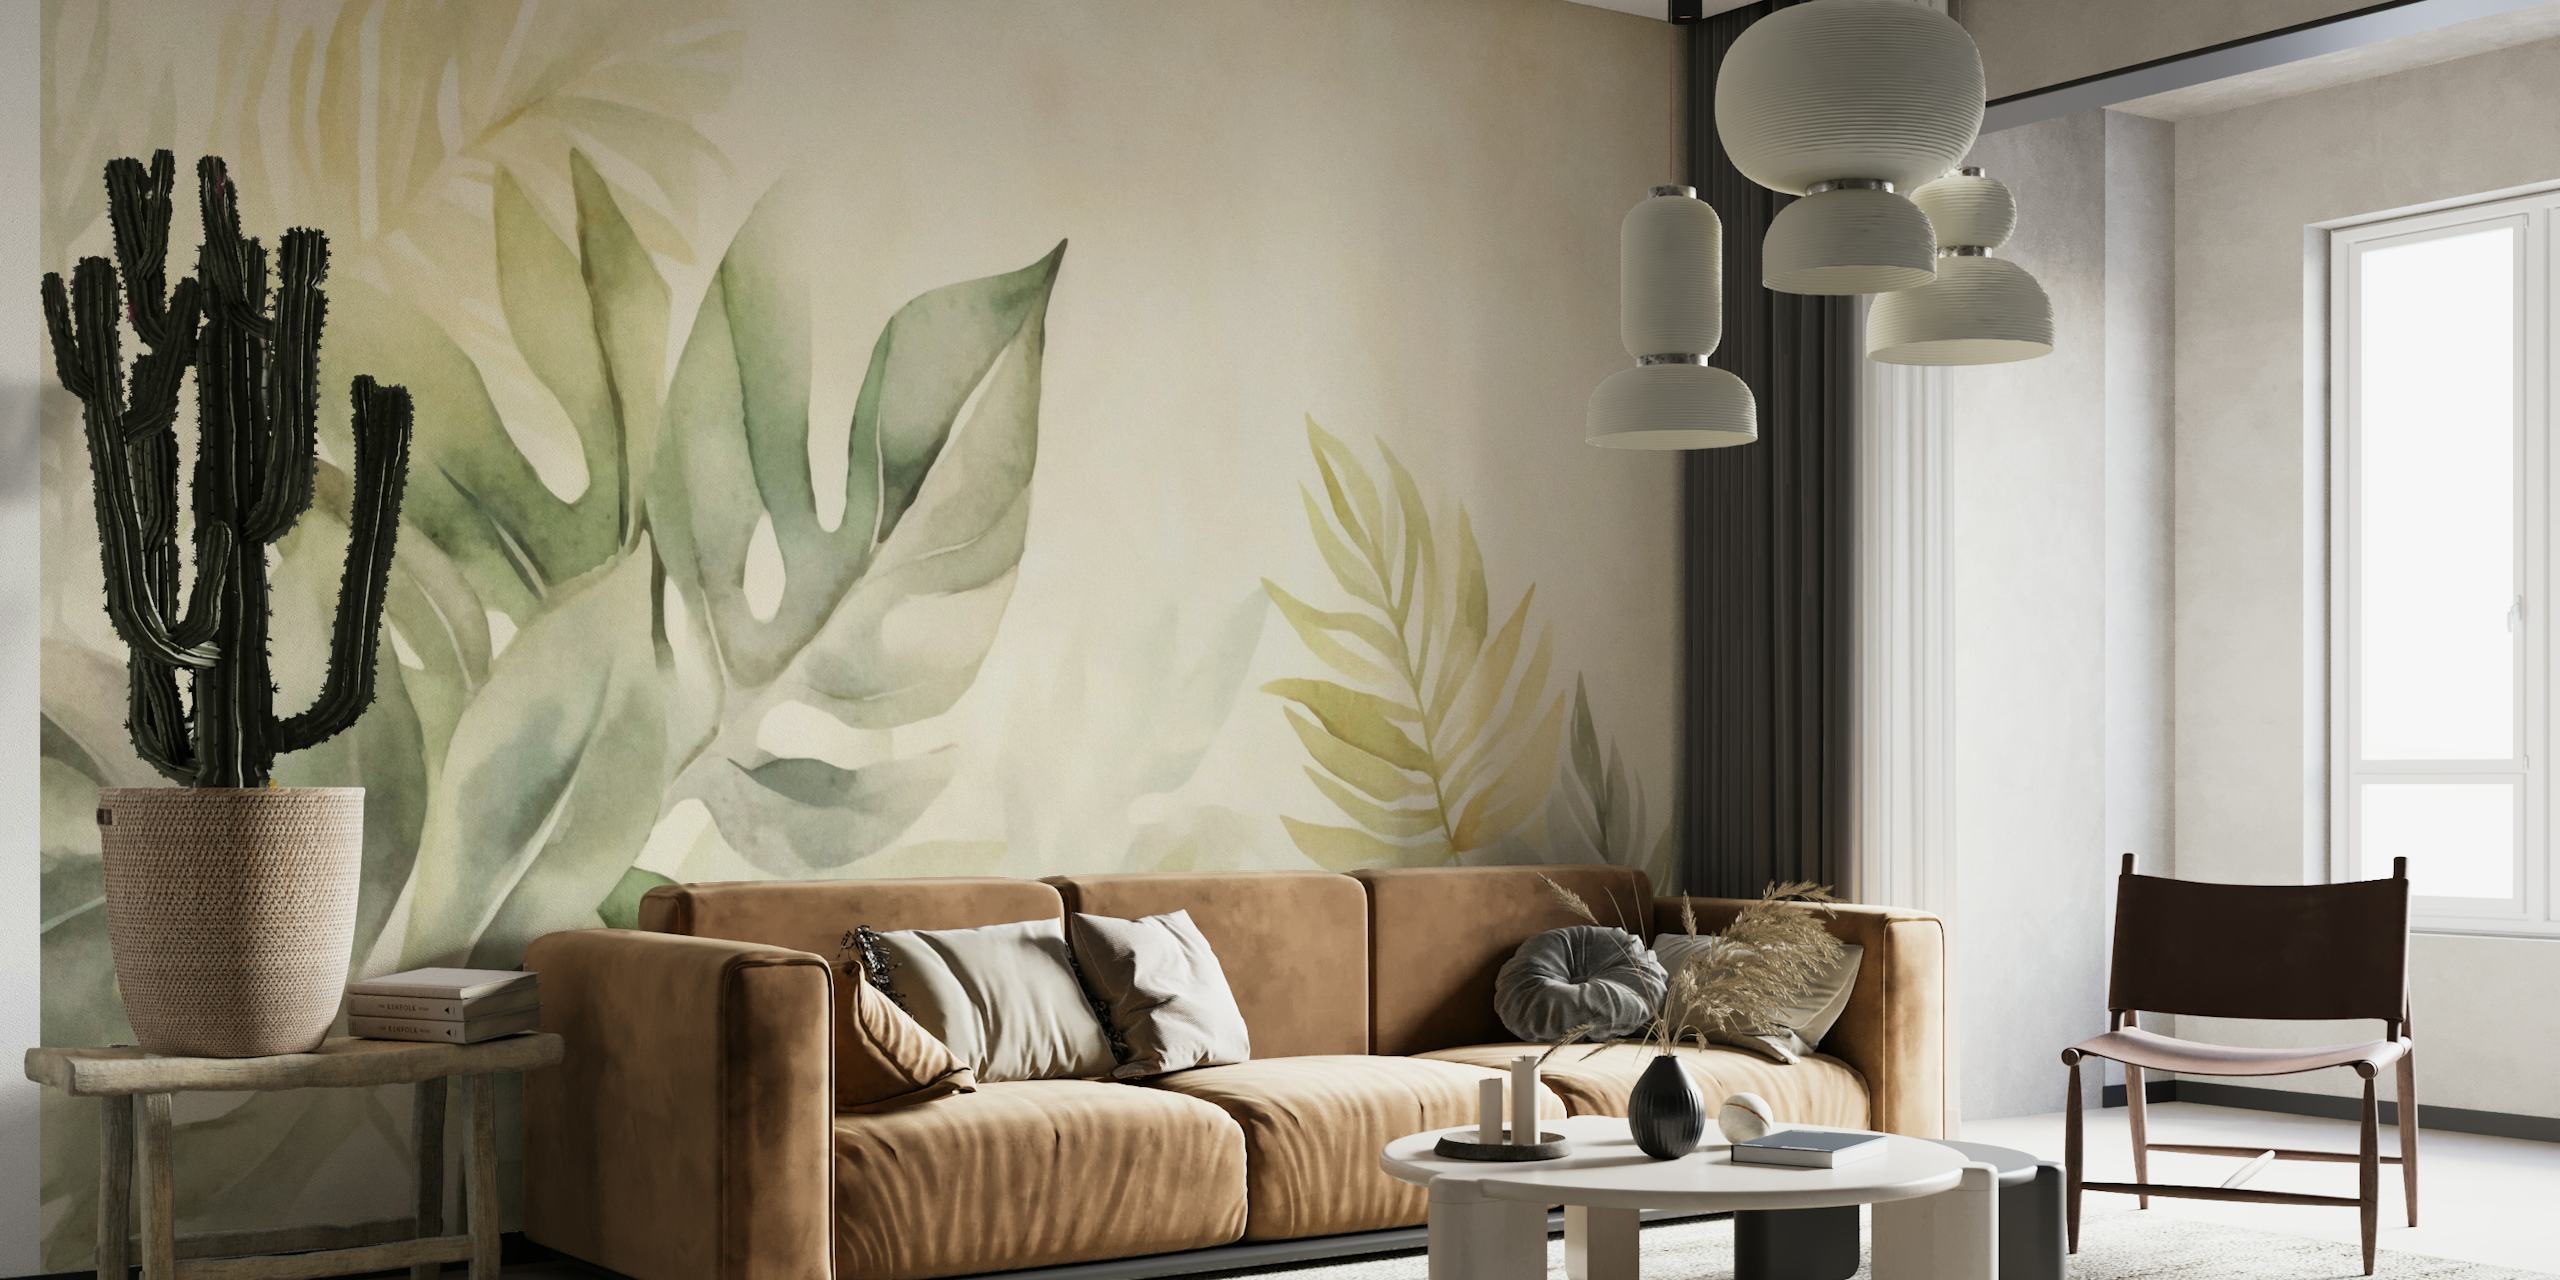 Fotomural de pared Gentle Leaf Tropical Whispers Beige Green con follaje sereno